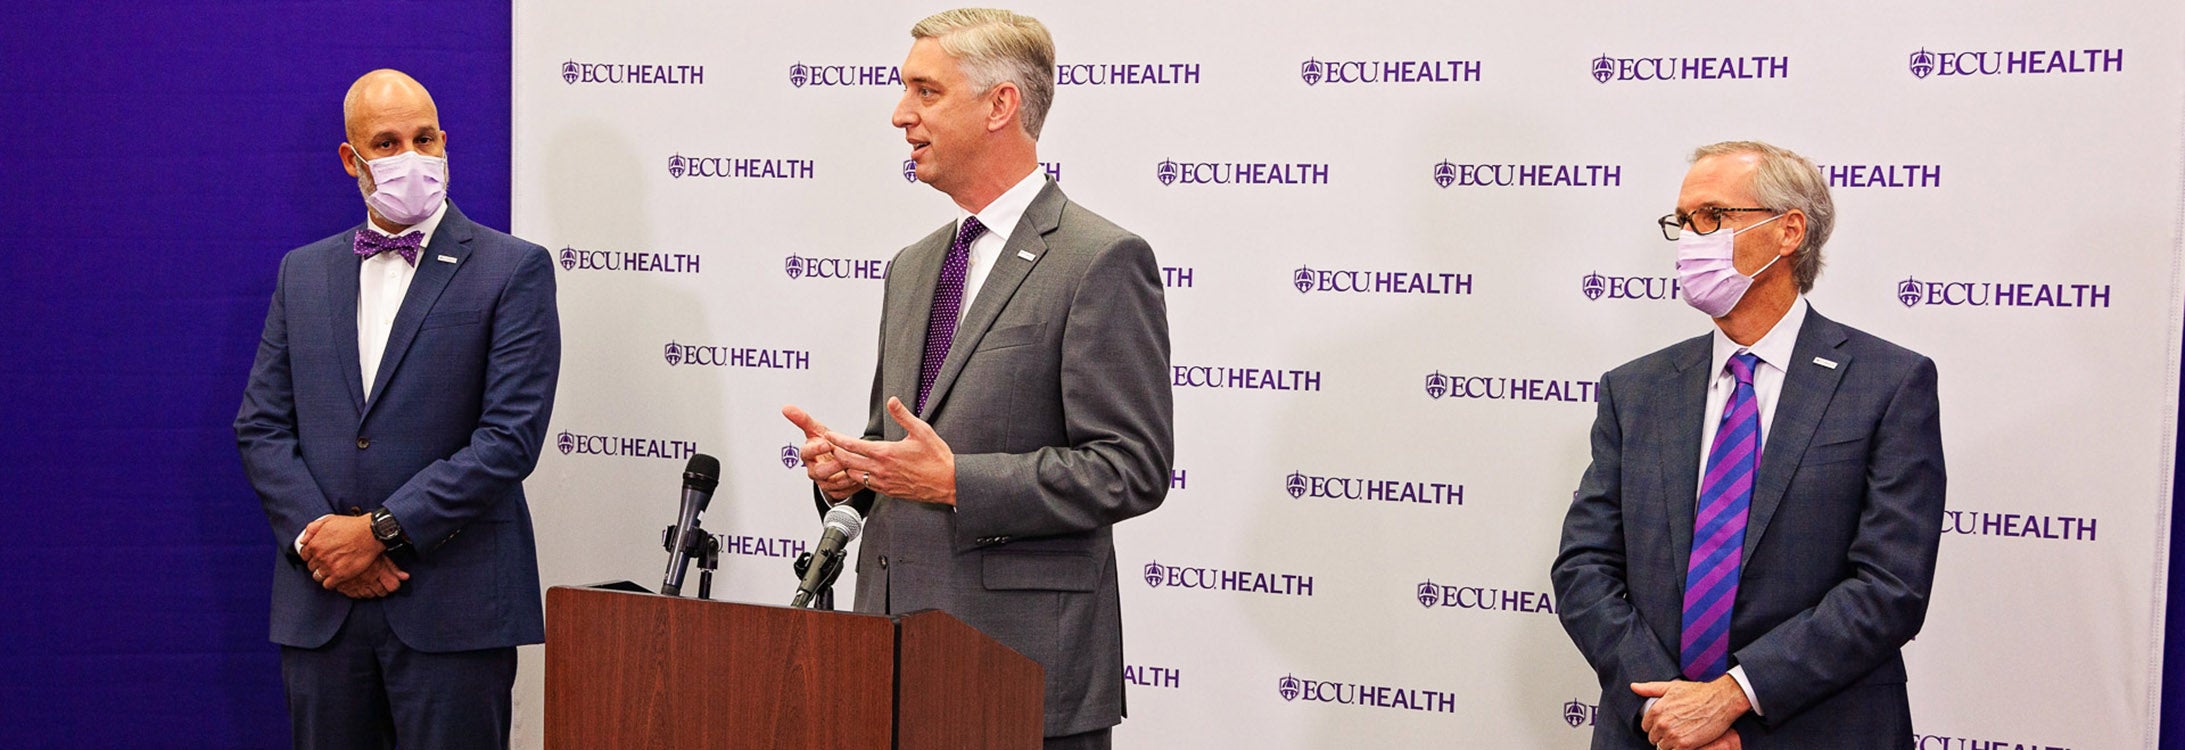 ECU Chancellor Philip Rogers and Dr. Michael Waldrum, CEO of Vidant Health, announce the new logo on April 14 for the ECU Health system.